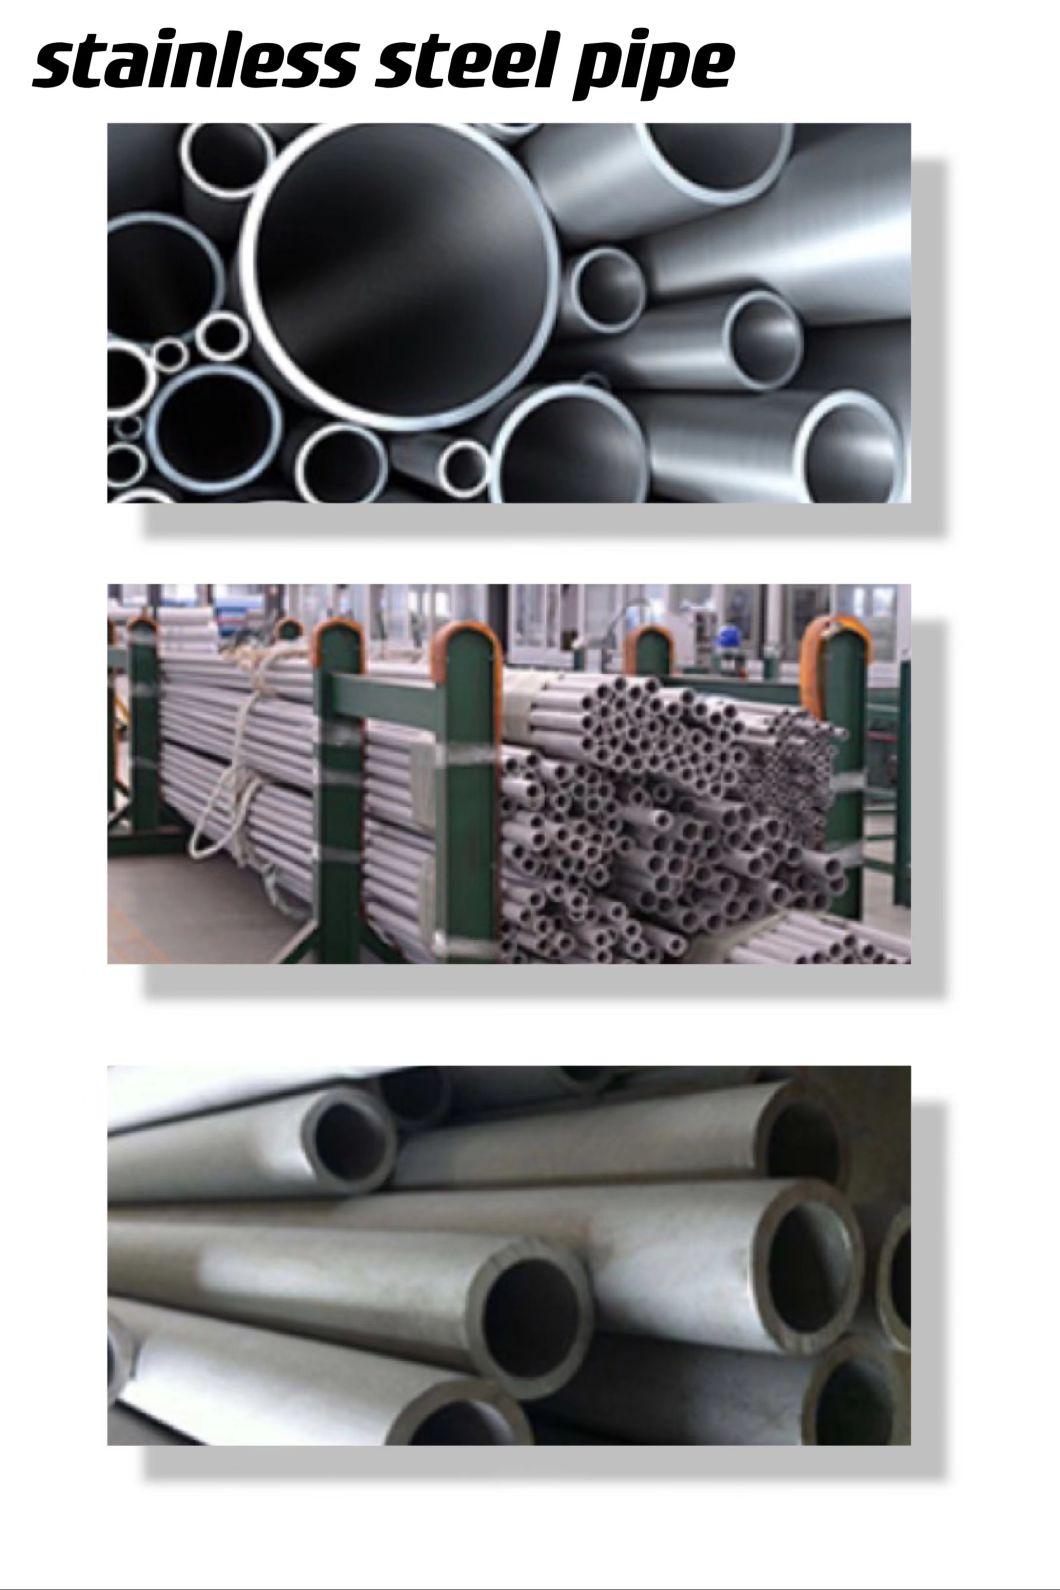 L&T Stainless Steel Pipe Export at Home and Aboard